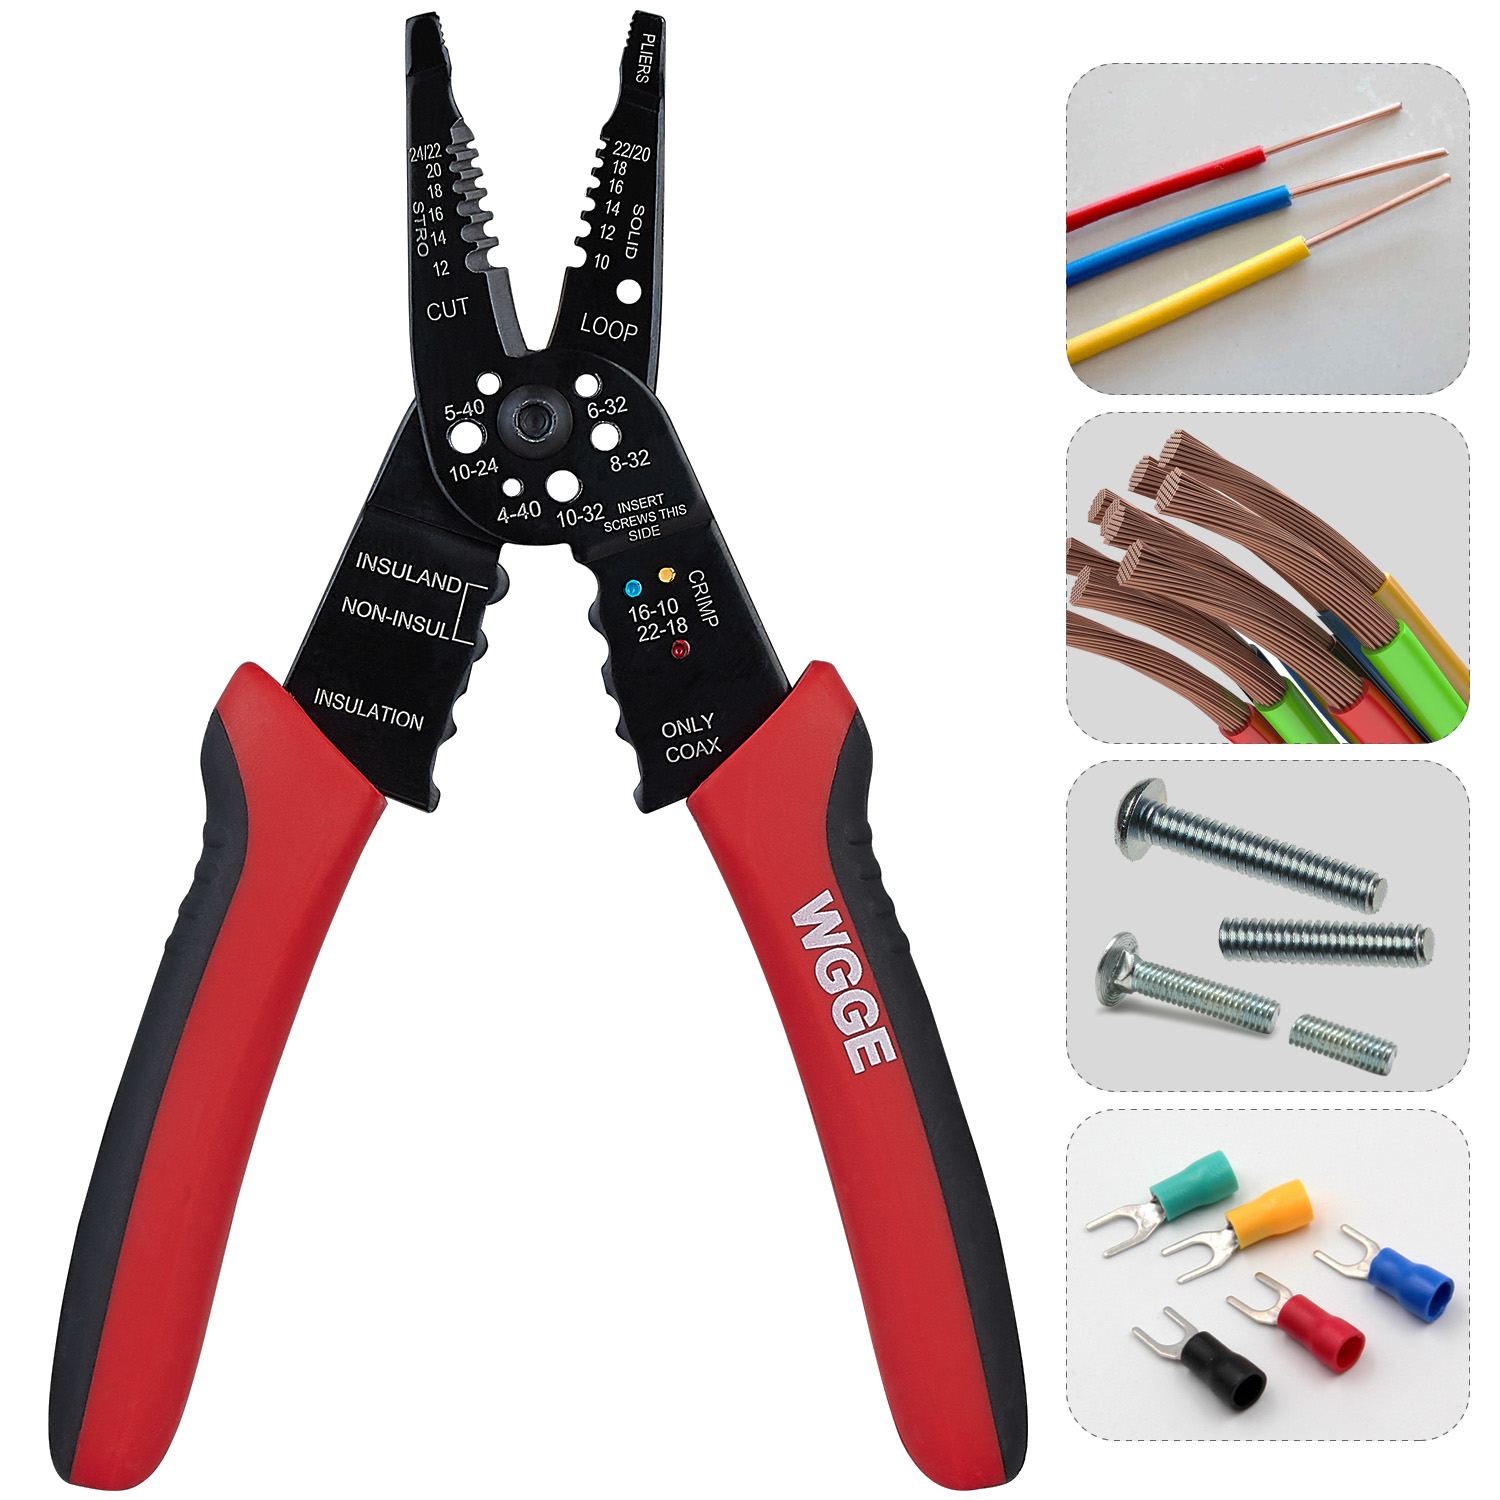 WGGE WG-015 Professional crimping tool / Multi-Tool Wire Stripper and Cutter  (Multi-Function Hand Tool) - Wu0026G Global Electronics Inc